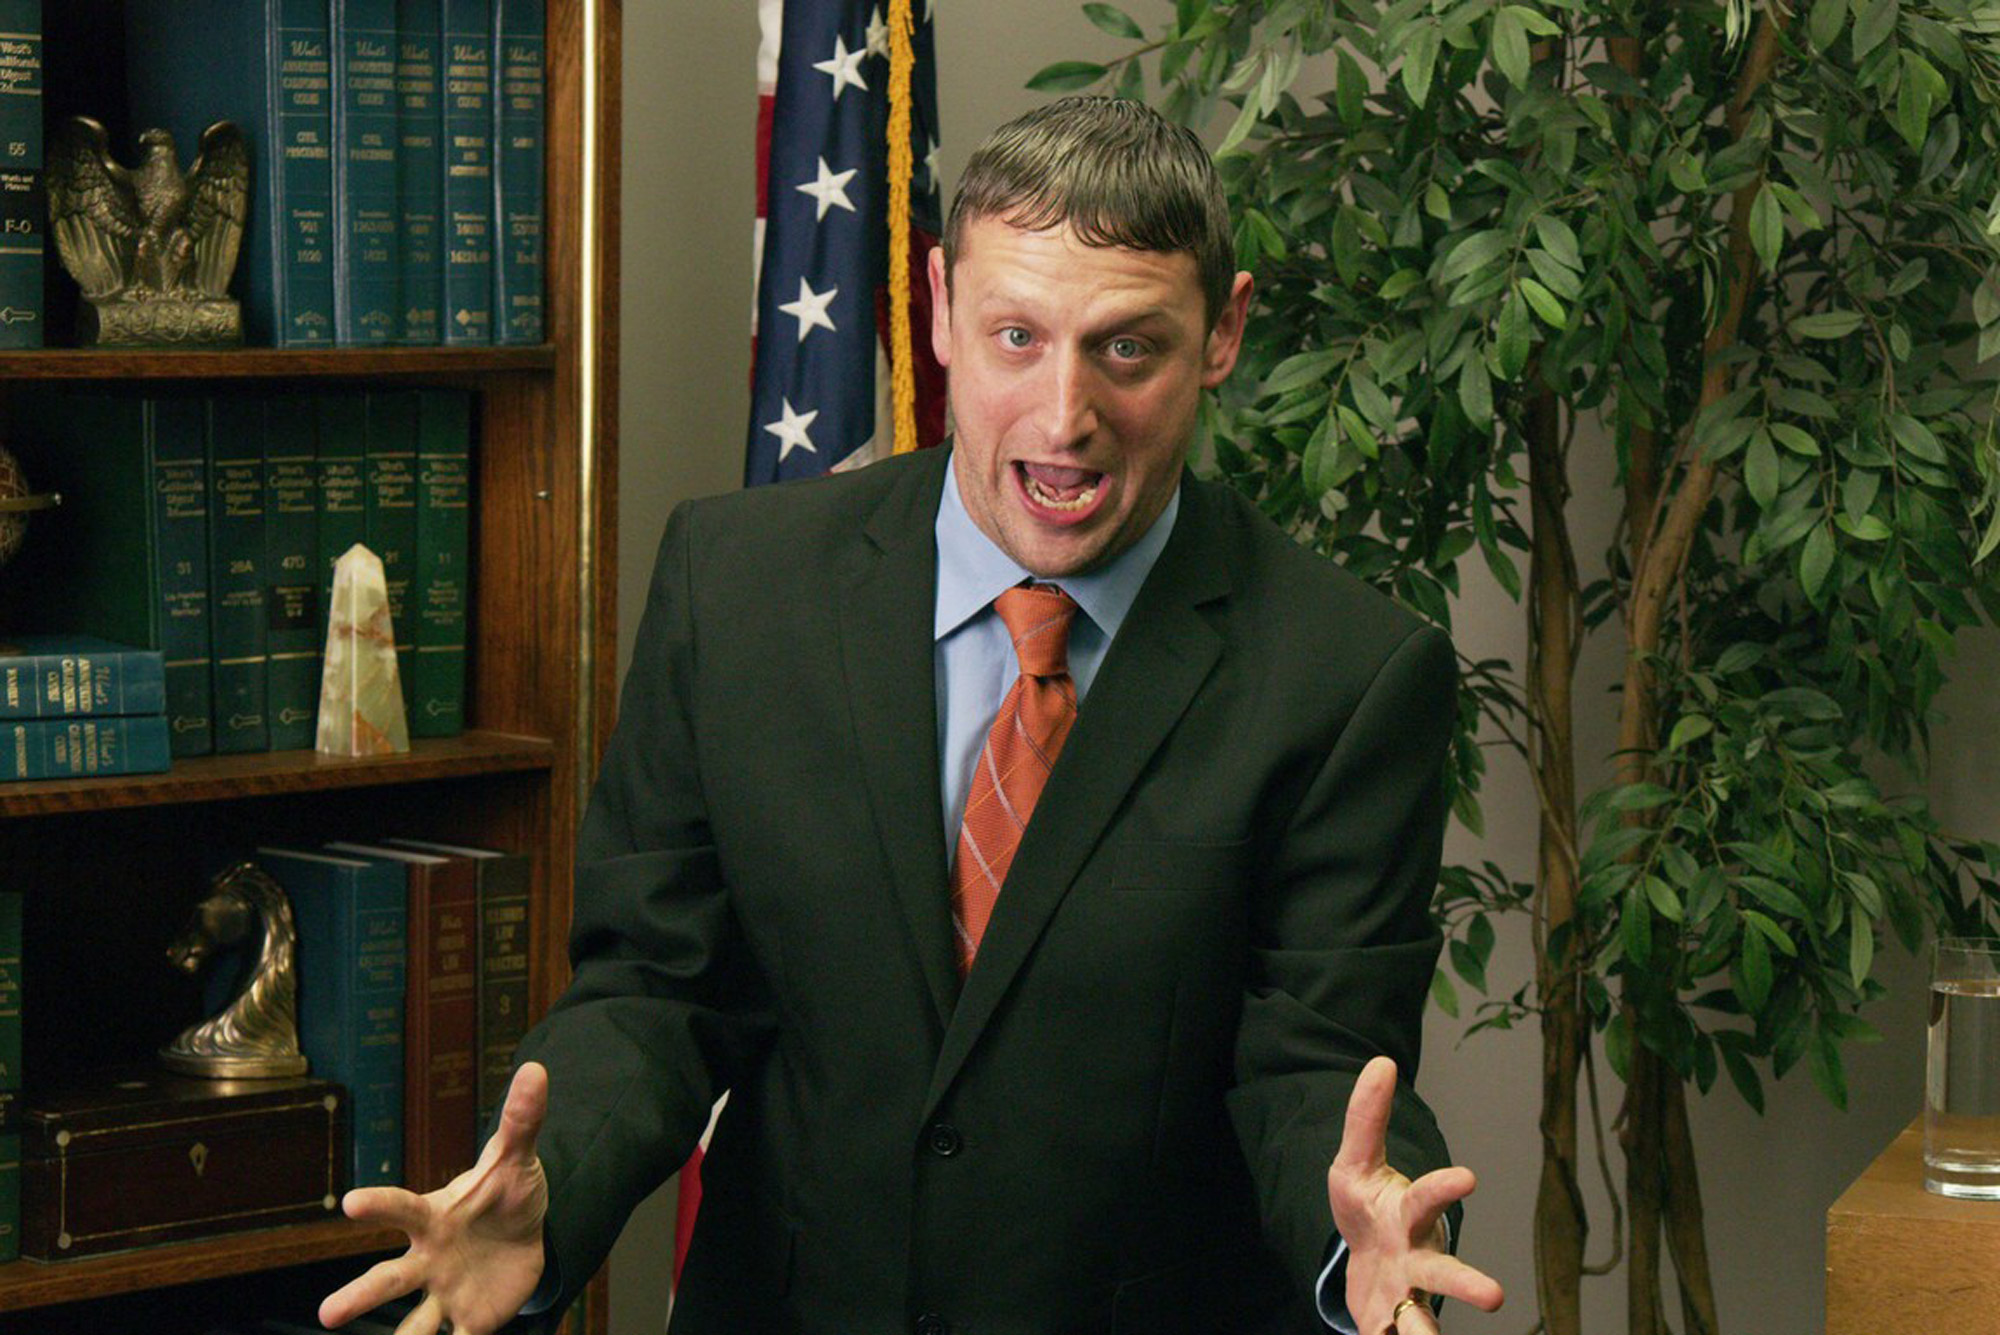 An image of Tim Robinson from the show I Think You Should Leave